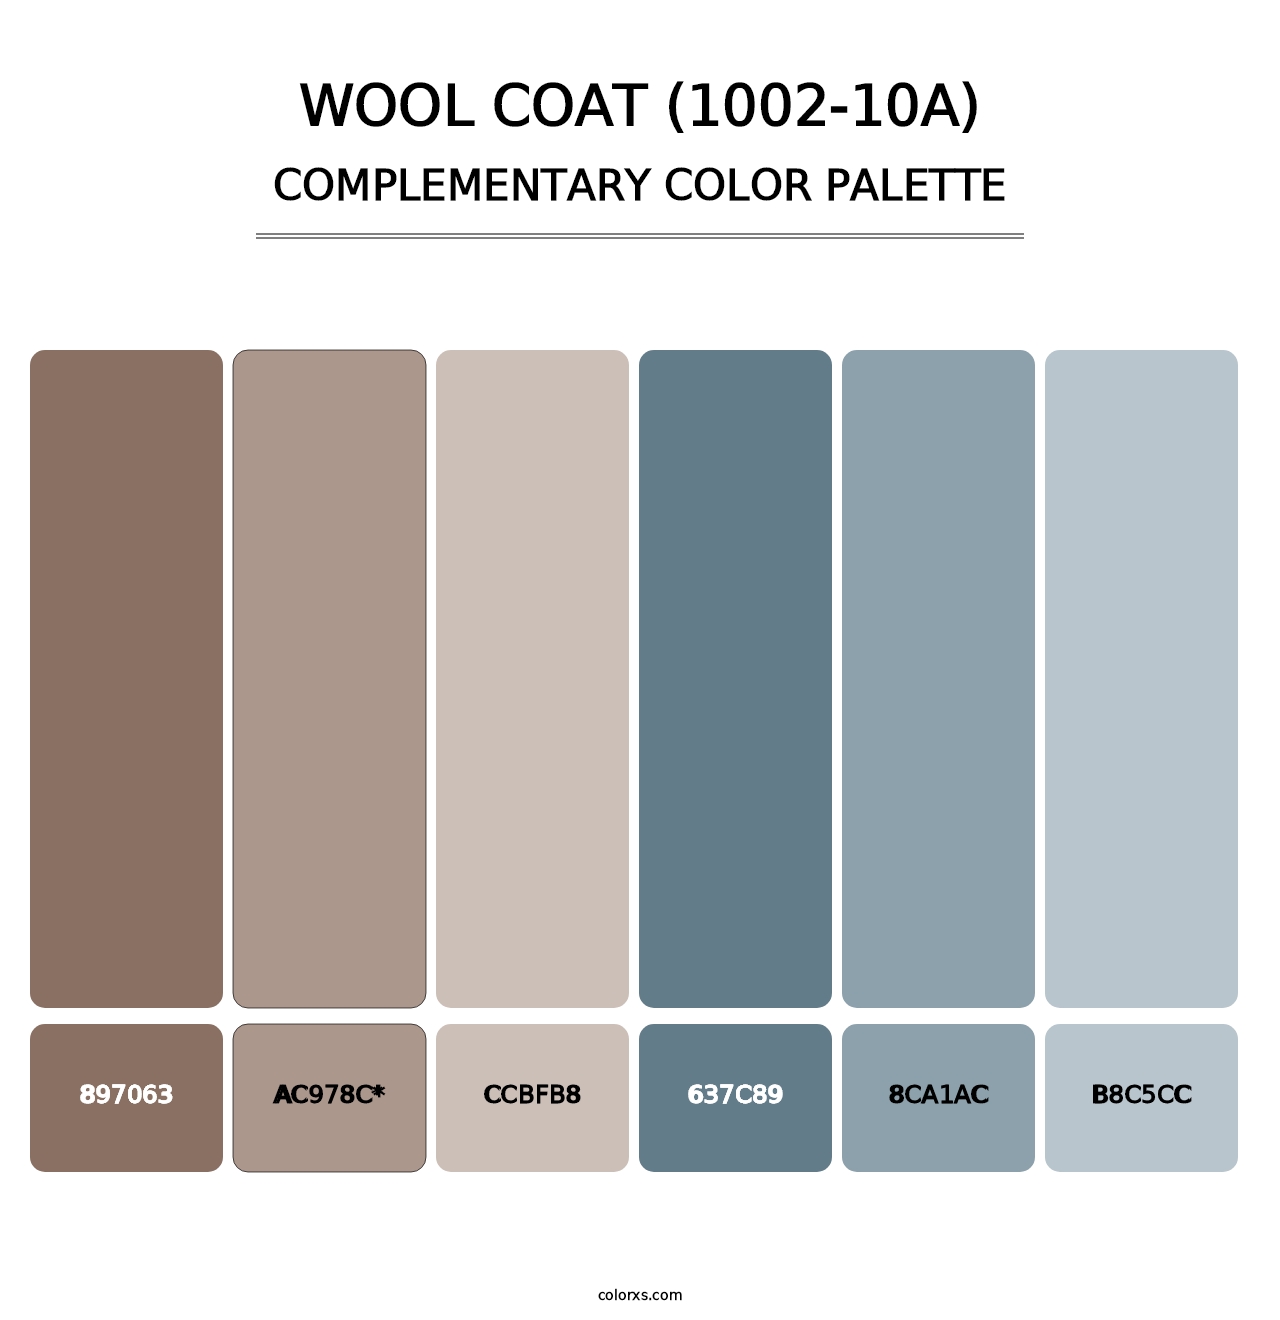 Wool Coat (1002-10A) - Complementary Color Palette